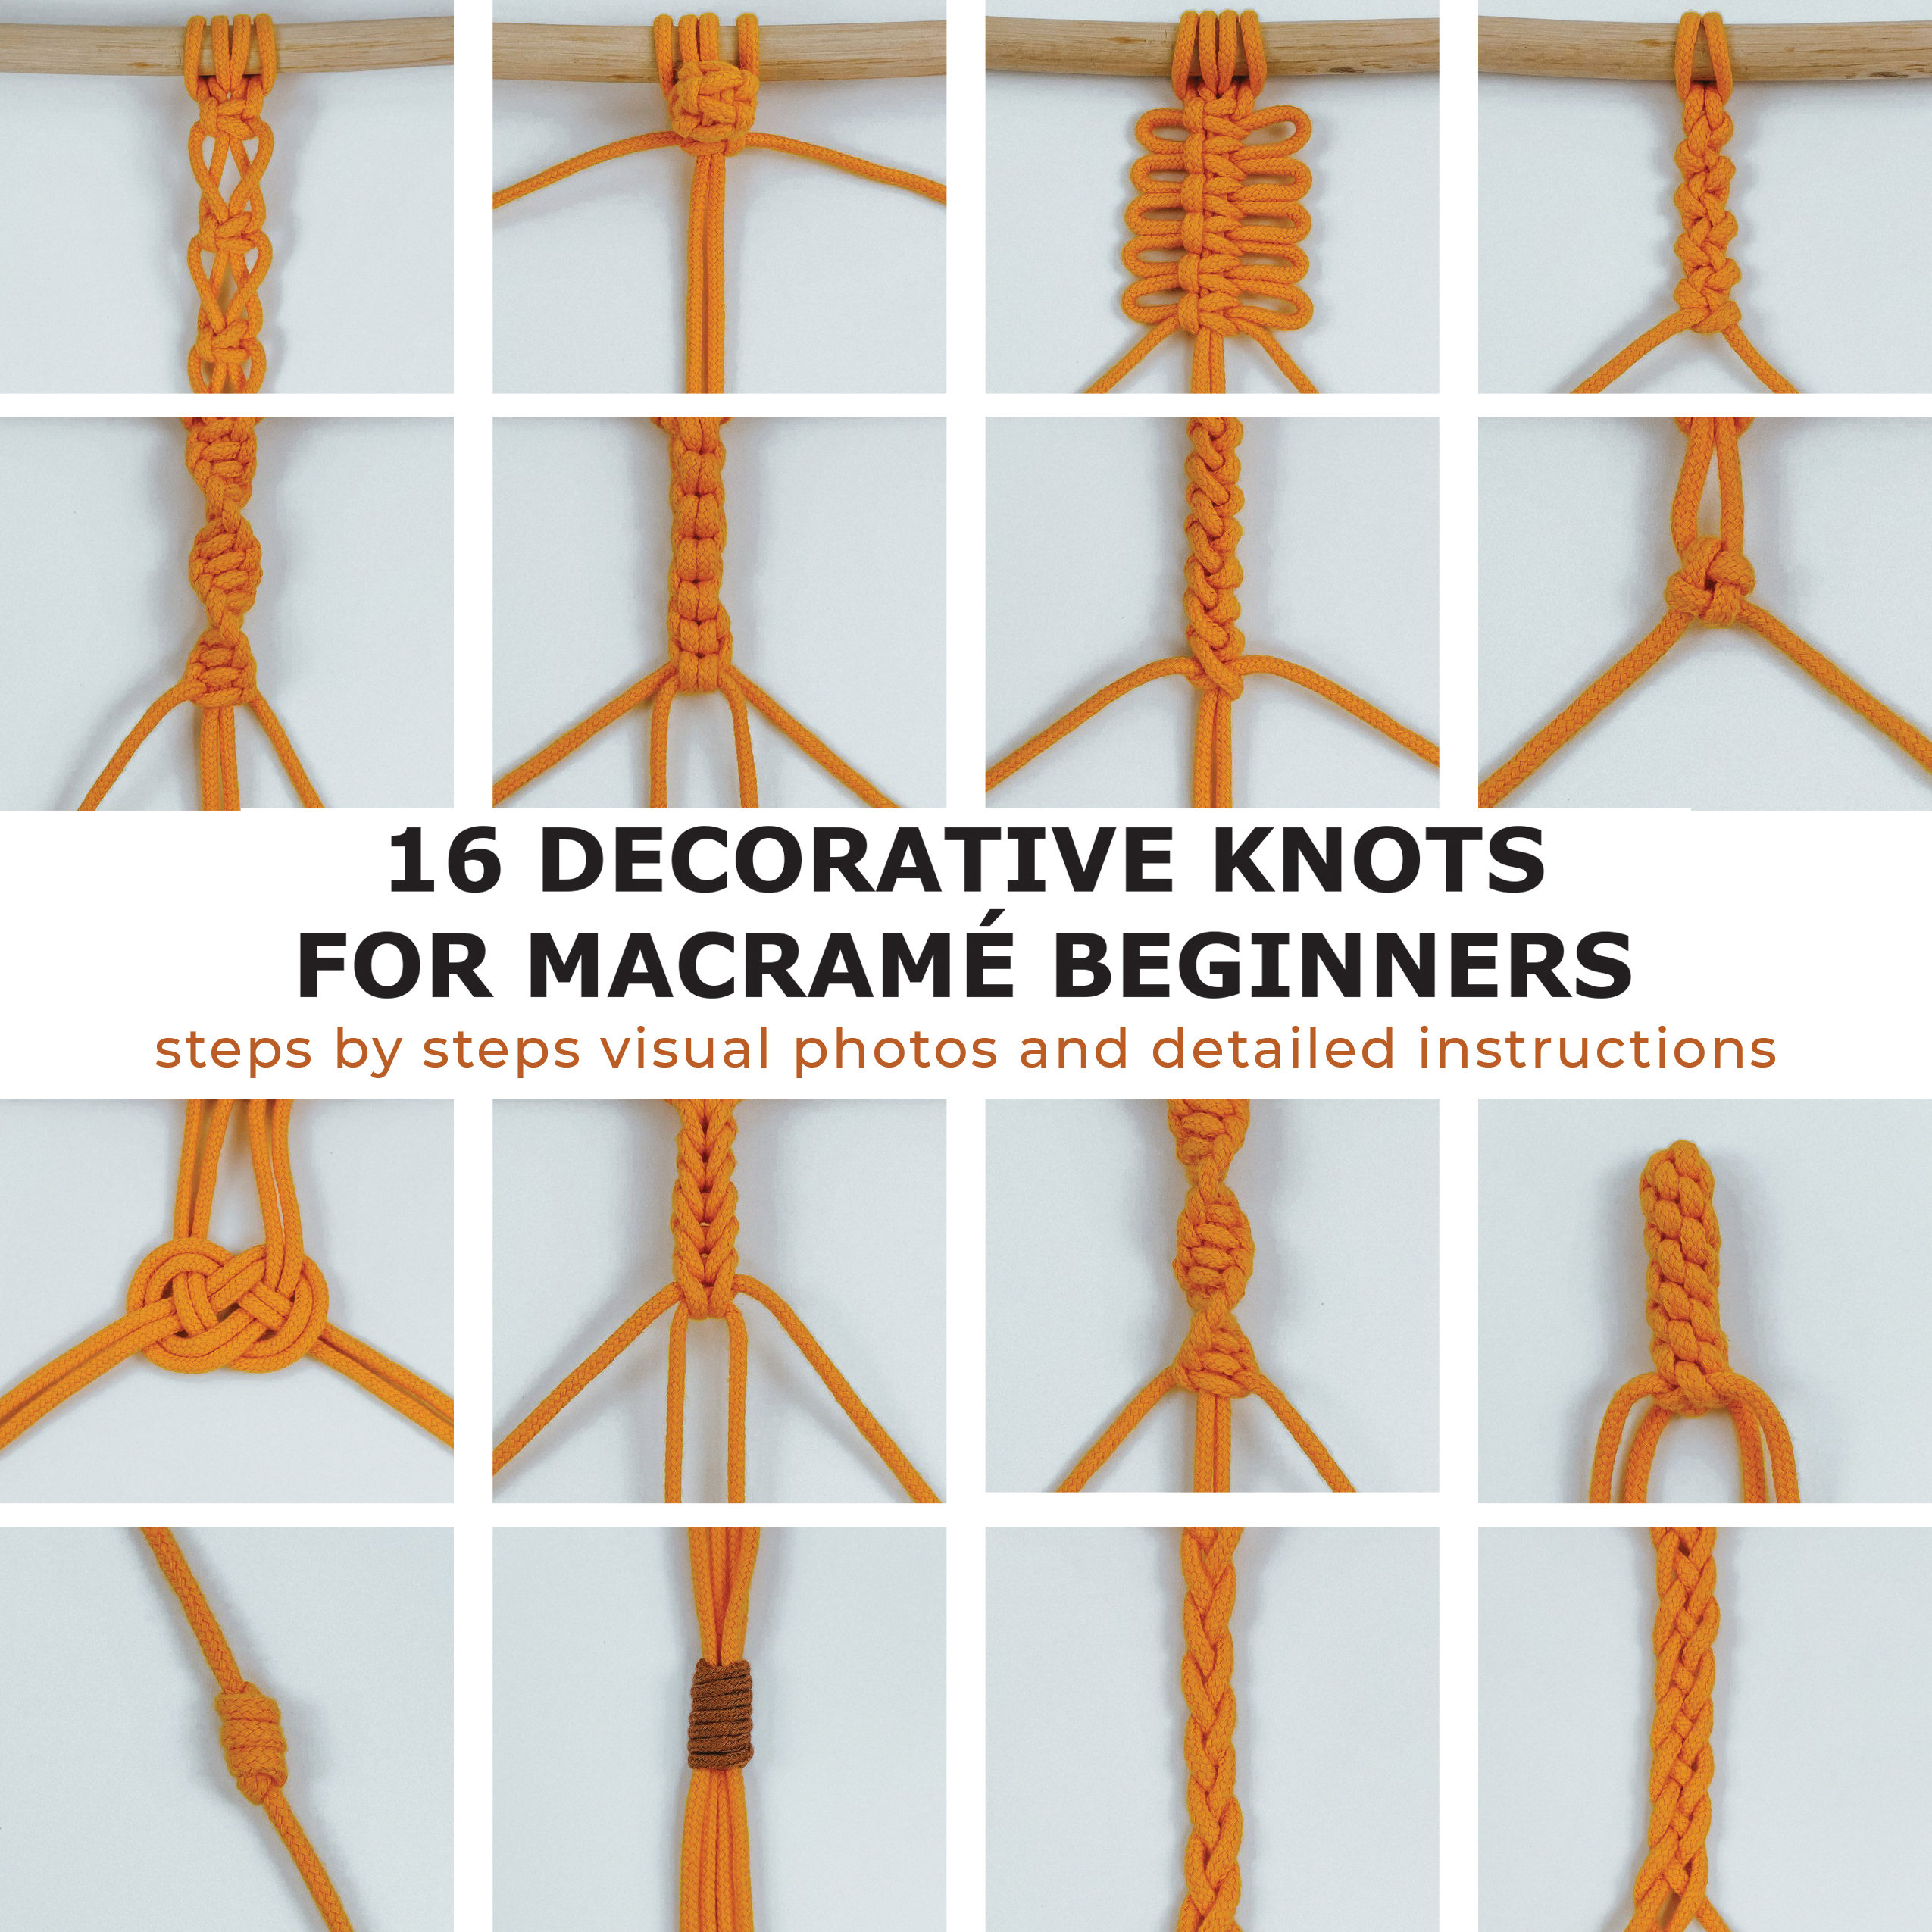 Macrame Decorative Knot Guide PDF With 16 Knots Explained - Etsy ...